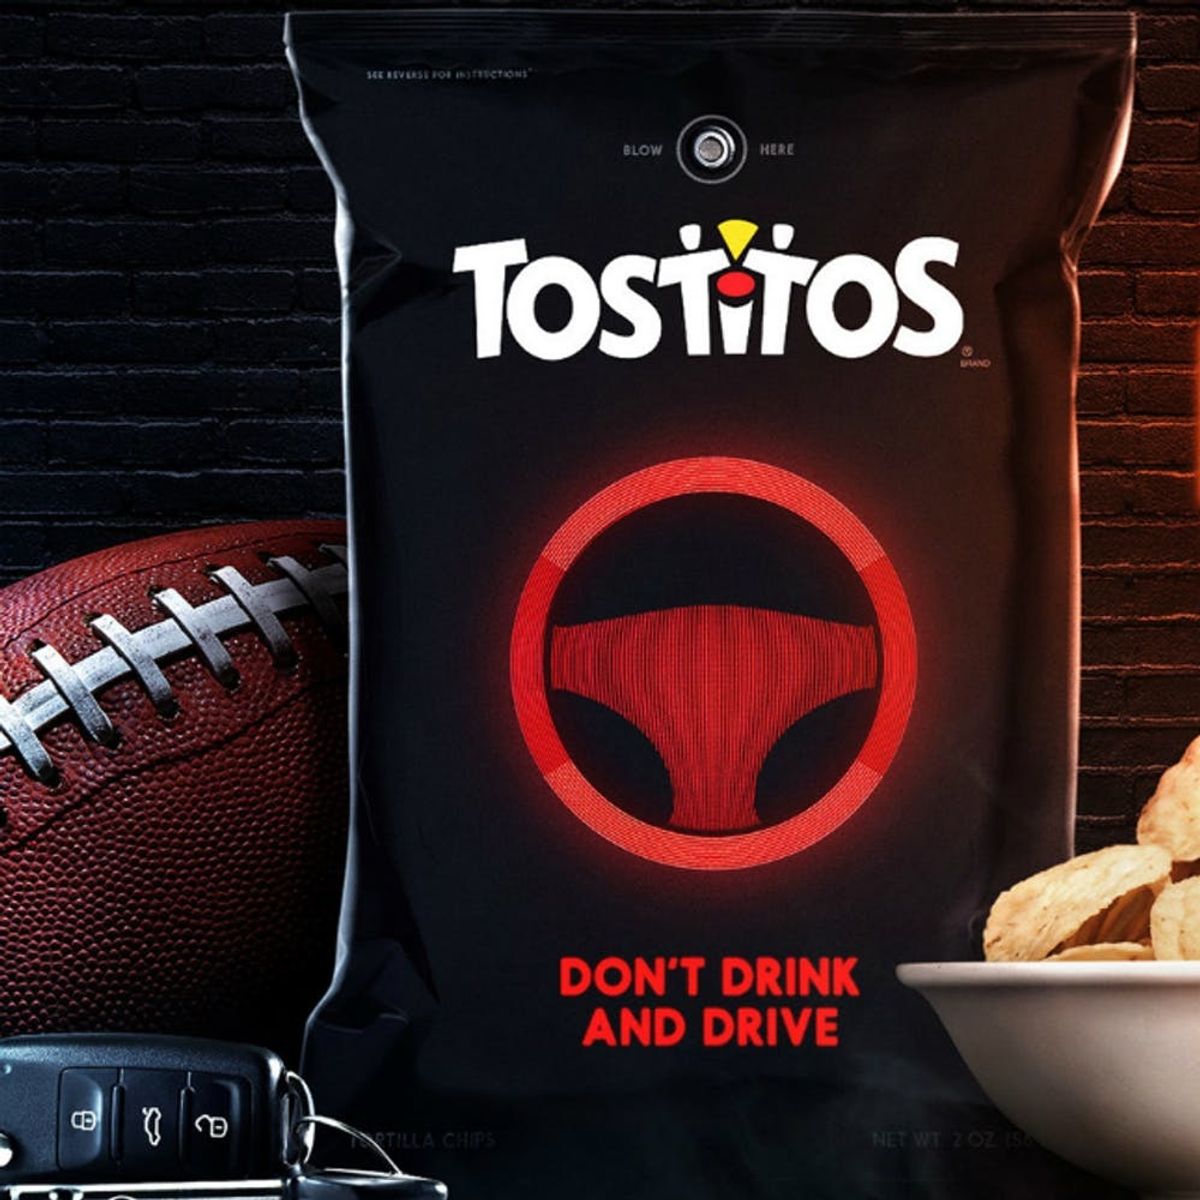 Tostitos Is Helping to Curb Drunk Driving This Super Bowl Sunday